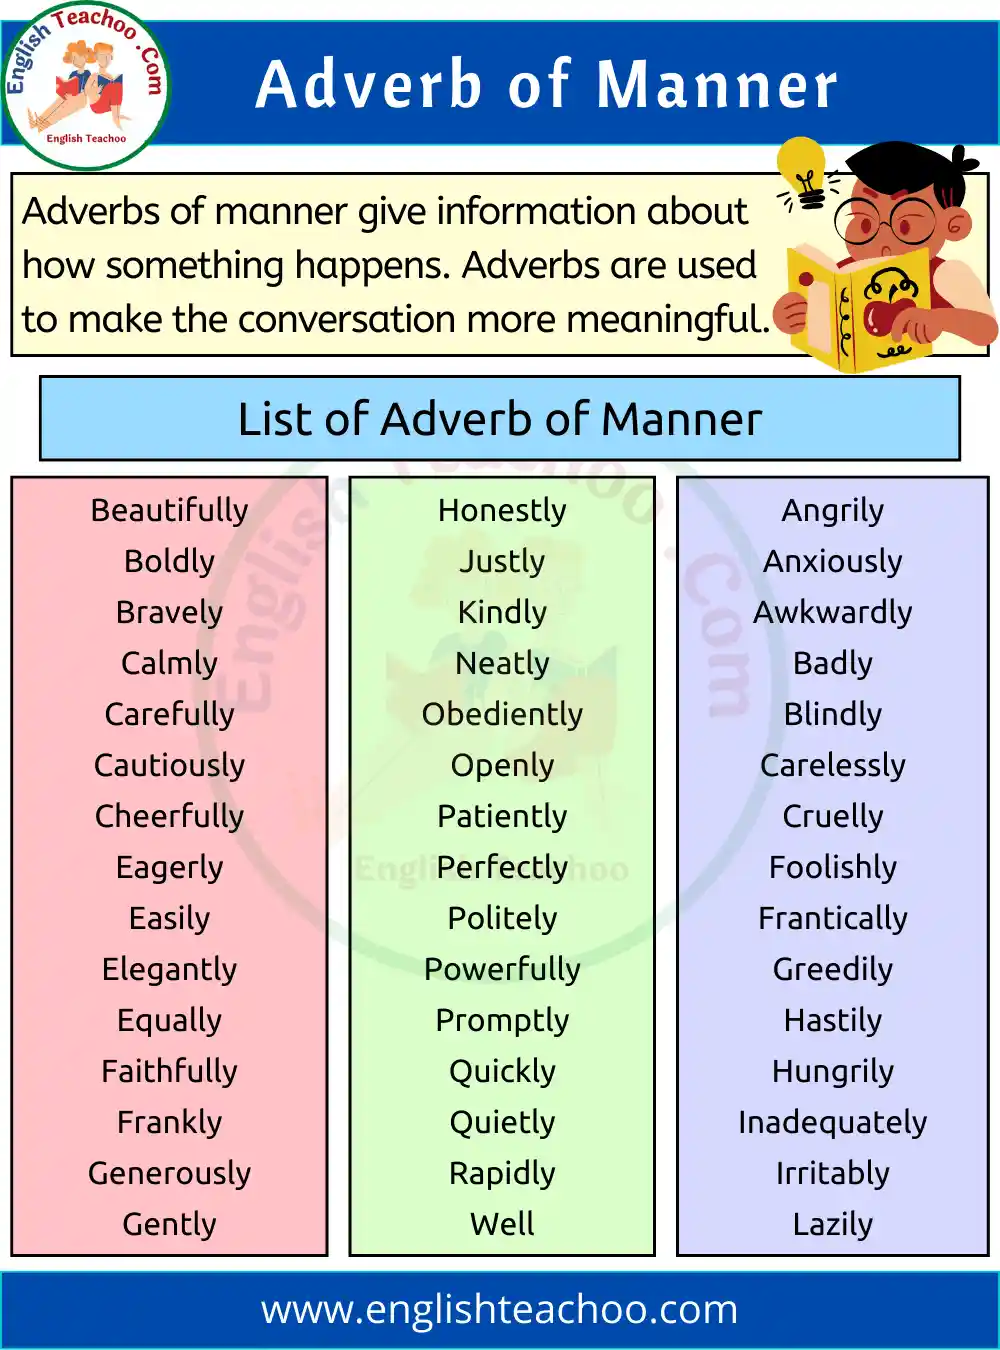 List of Adverb of Manner